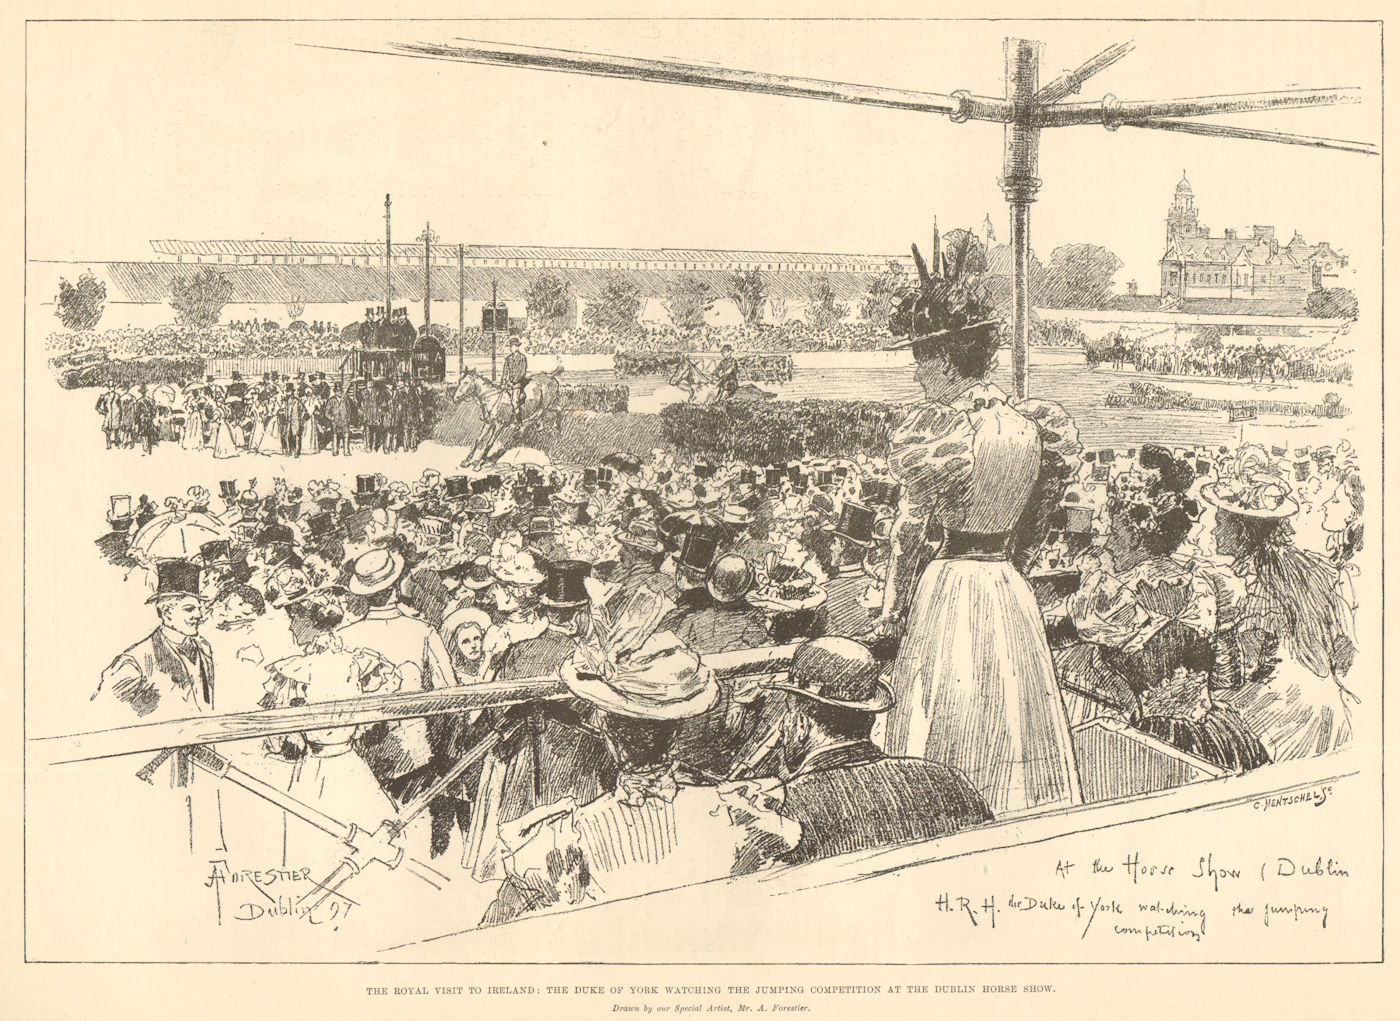 Associate Product The Duke of York watching the jumping competition at the Dublin Horse Show 1897